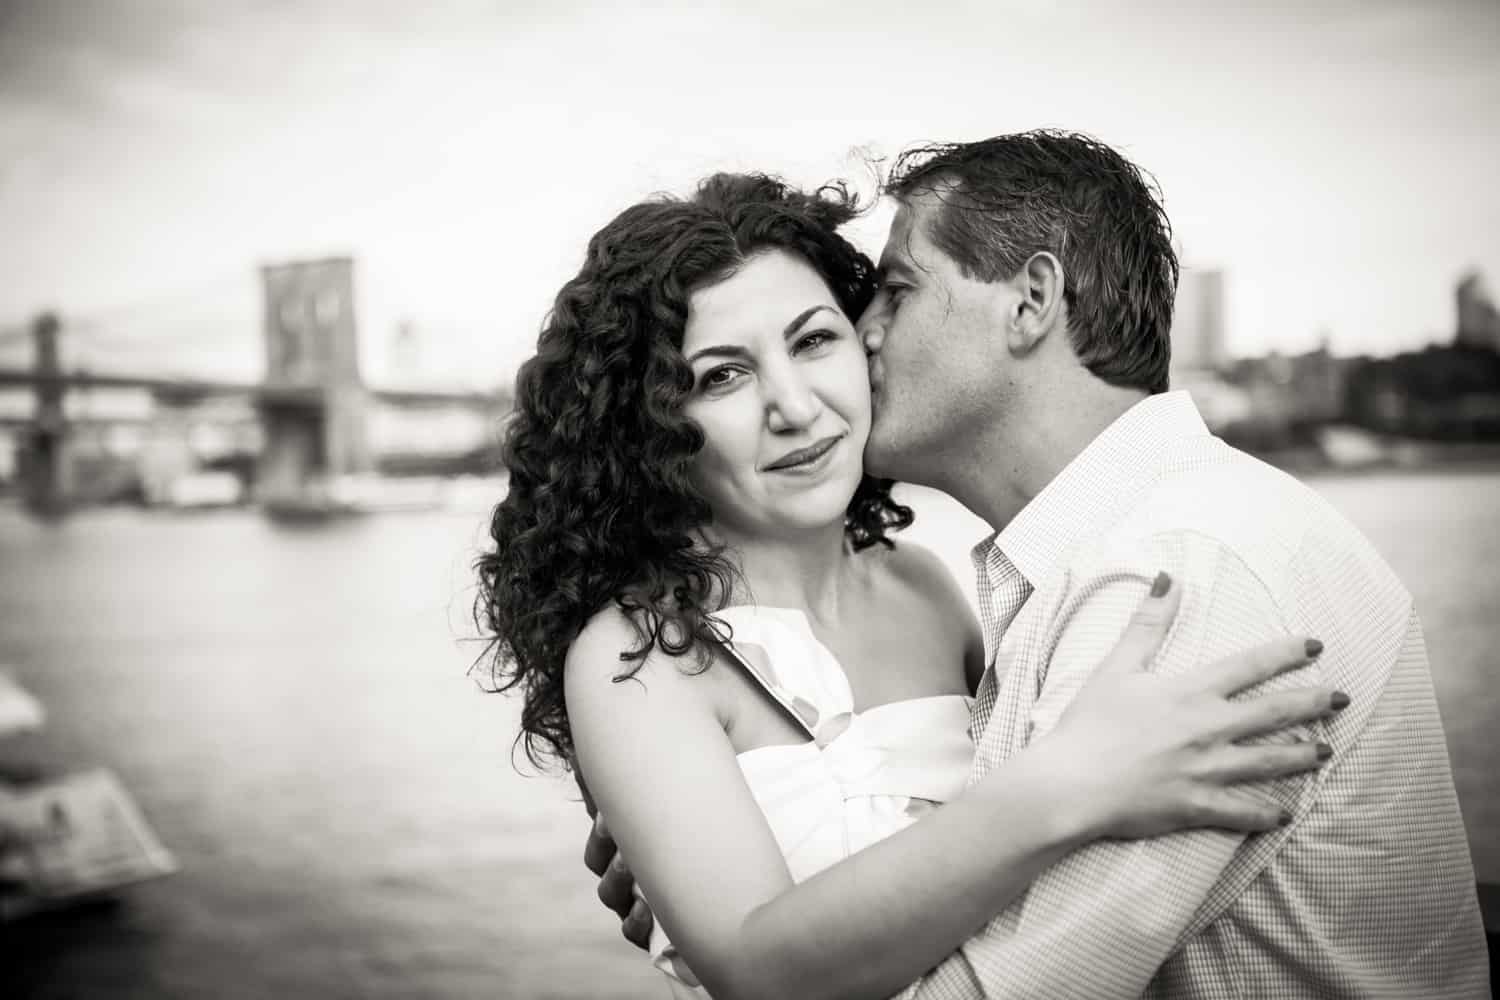 Black and white photo of man kissing woman on cheek by waterfront